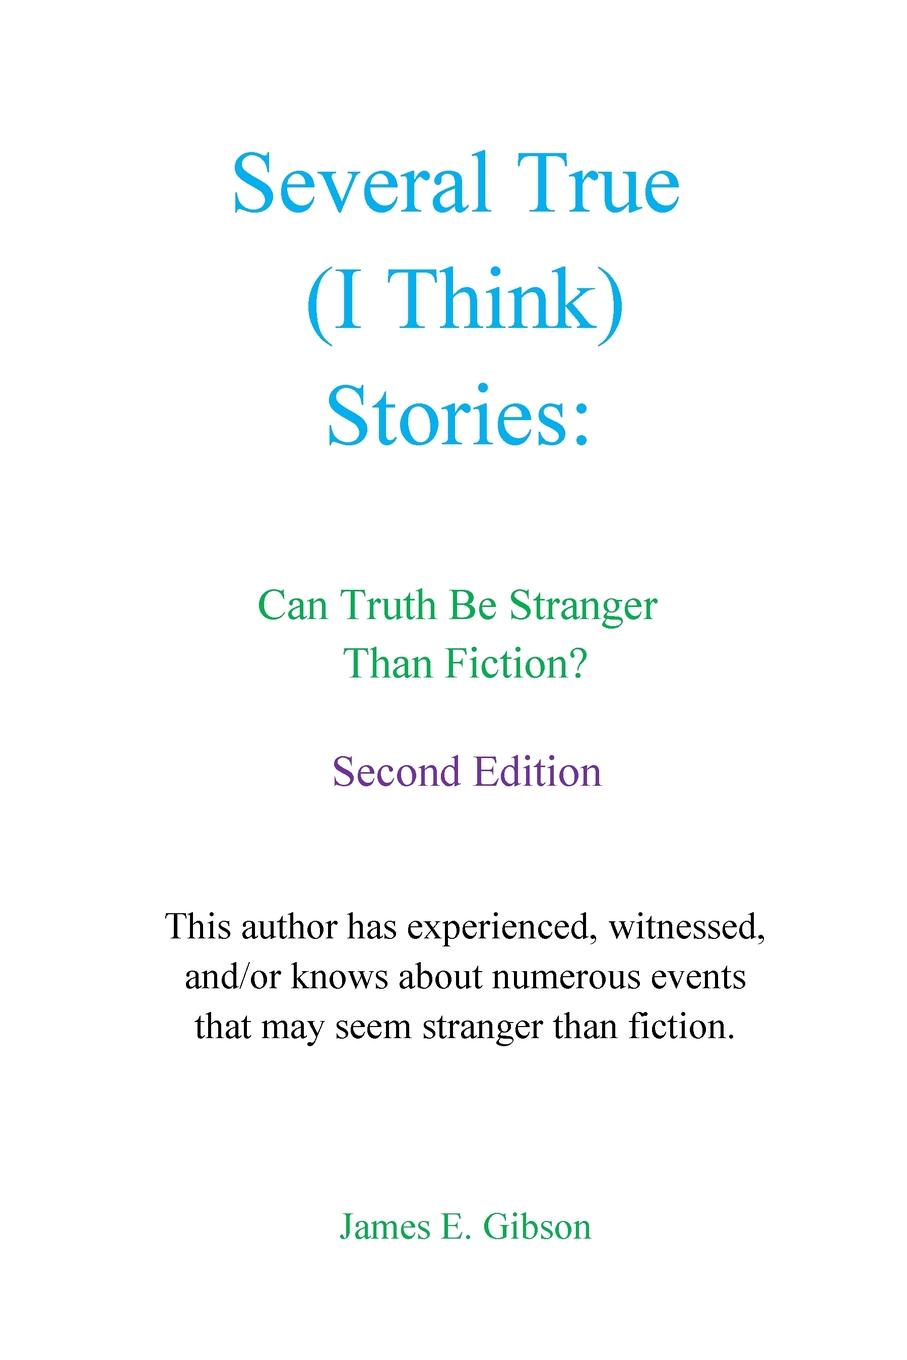 Several True (I Think) Stories. Can Truth Be Stranger Than Fiction.